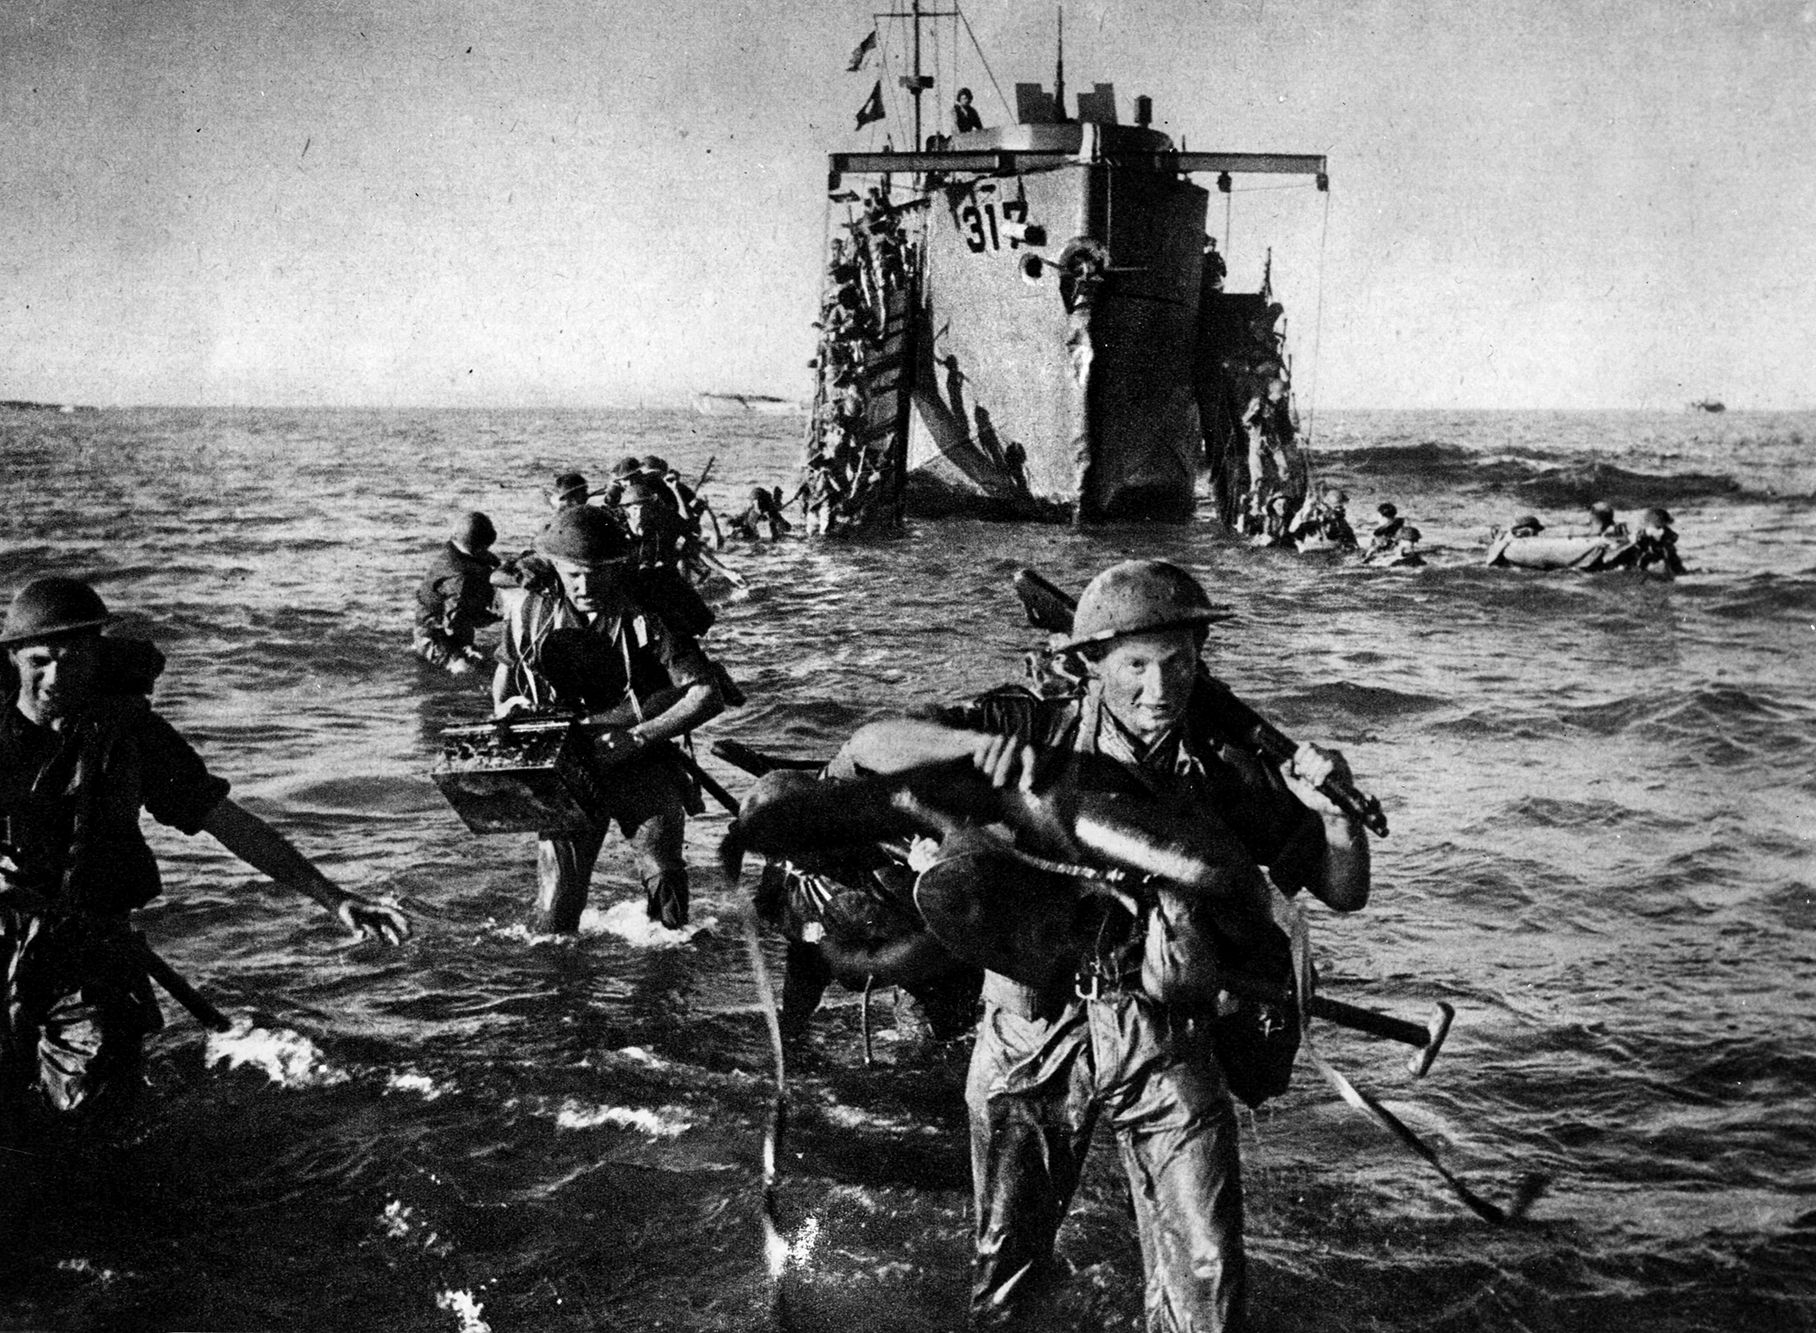 British troops wade ashore from an LCI (Landing Craft Infantry) onto one of the invasion beaches on the east coast of Sicily, July 10, 1943. Bernard Montgomery’s British Eighth Army ran into unexpectedly stiff opposition from the Germans and Italians, which slowed its progress northward. 